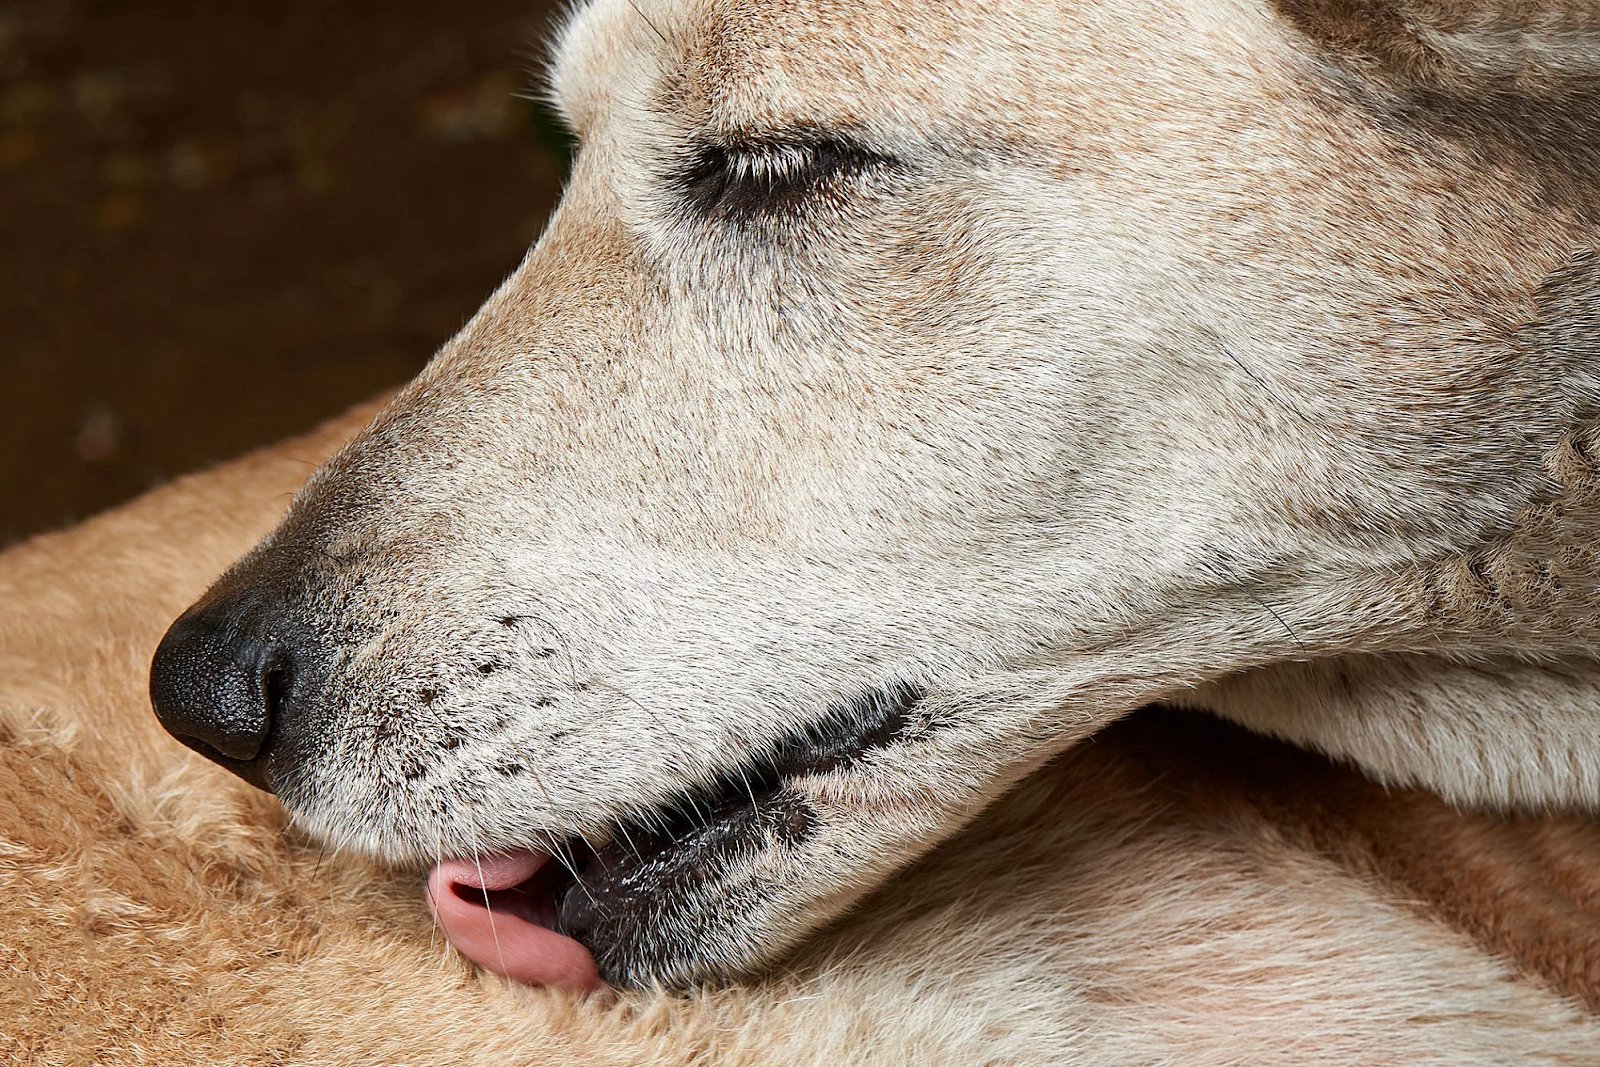 How To Stop a Dog from Licking Wound - Everything You Need to Know